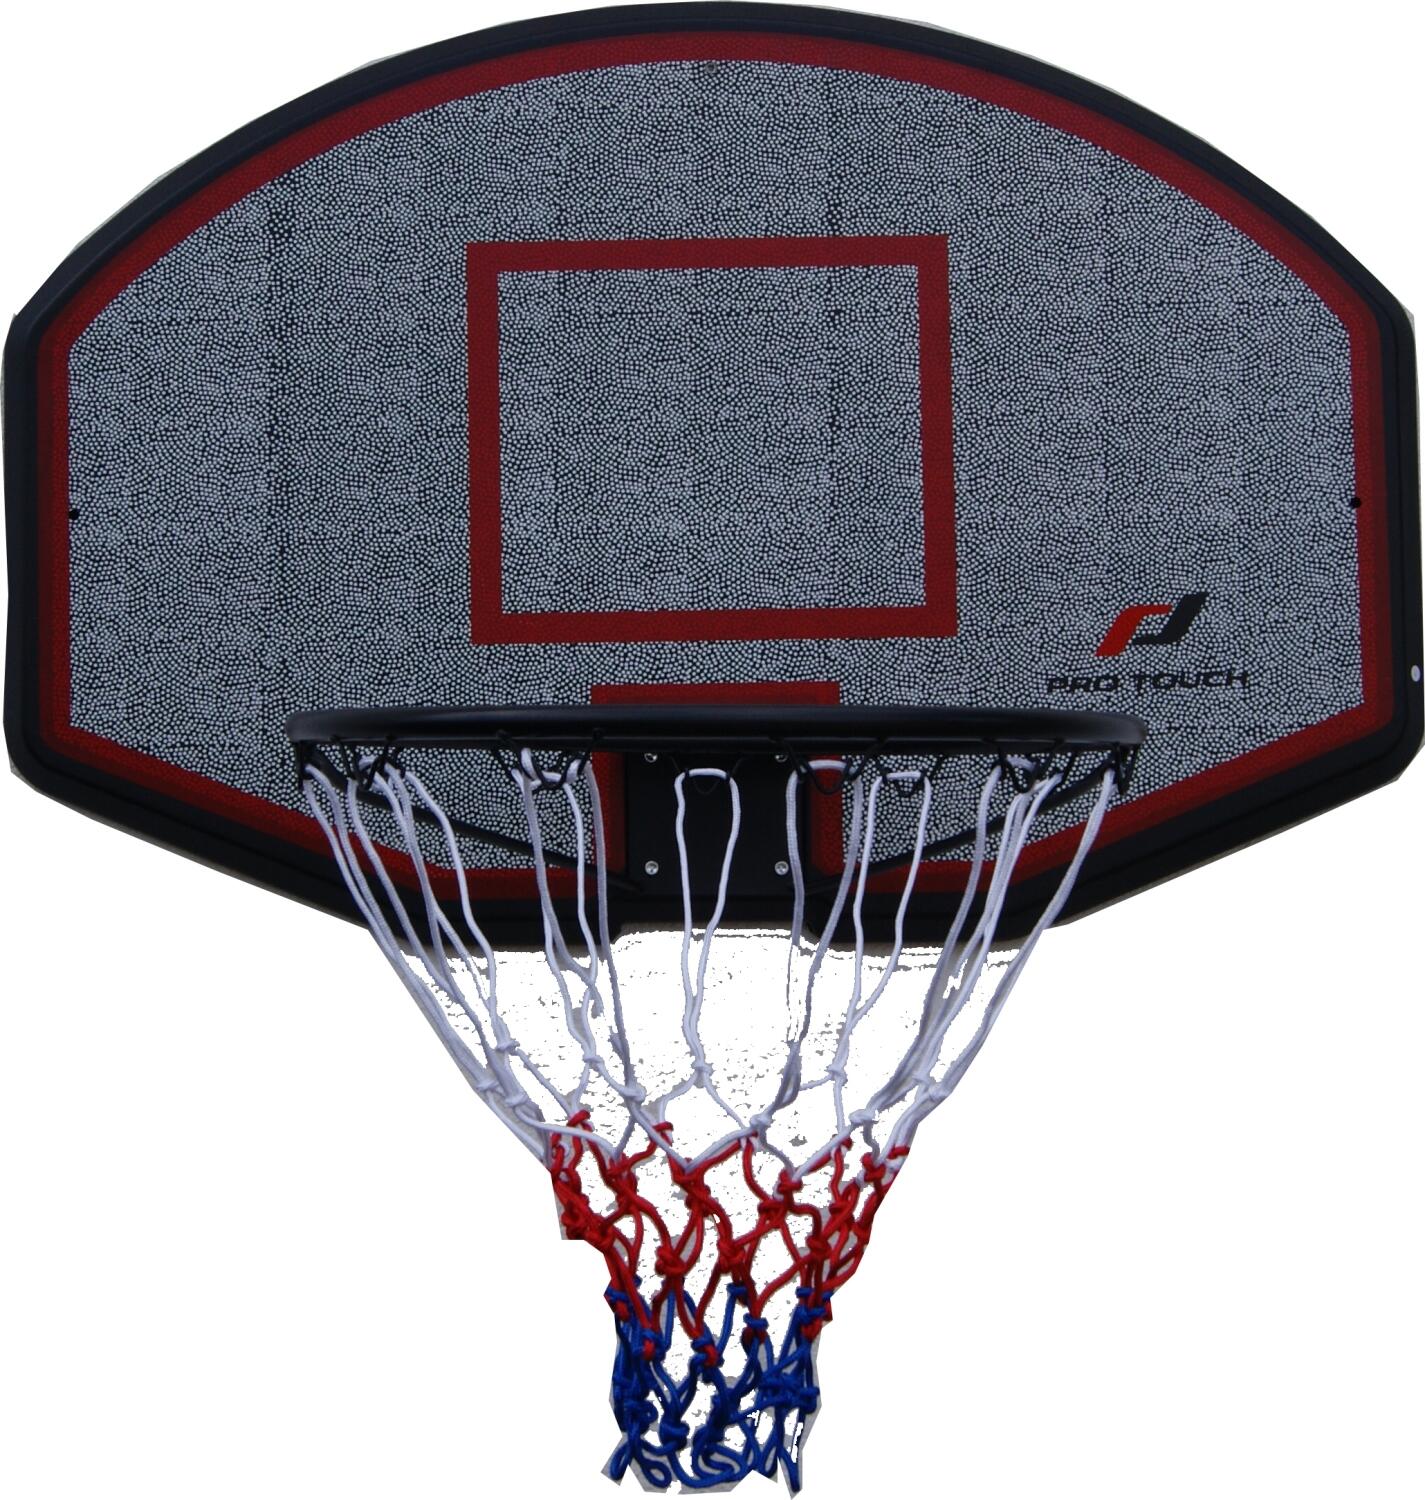 Pro Touch Basketball Board Harlem (Farbe: 001 multicolor)